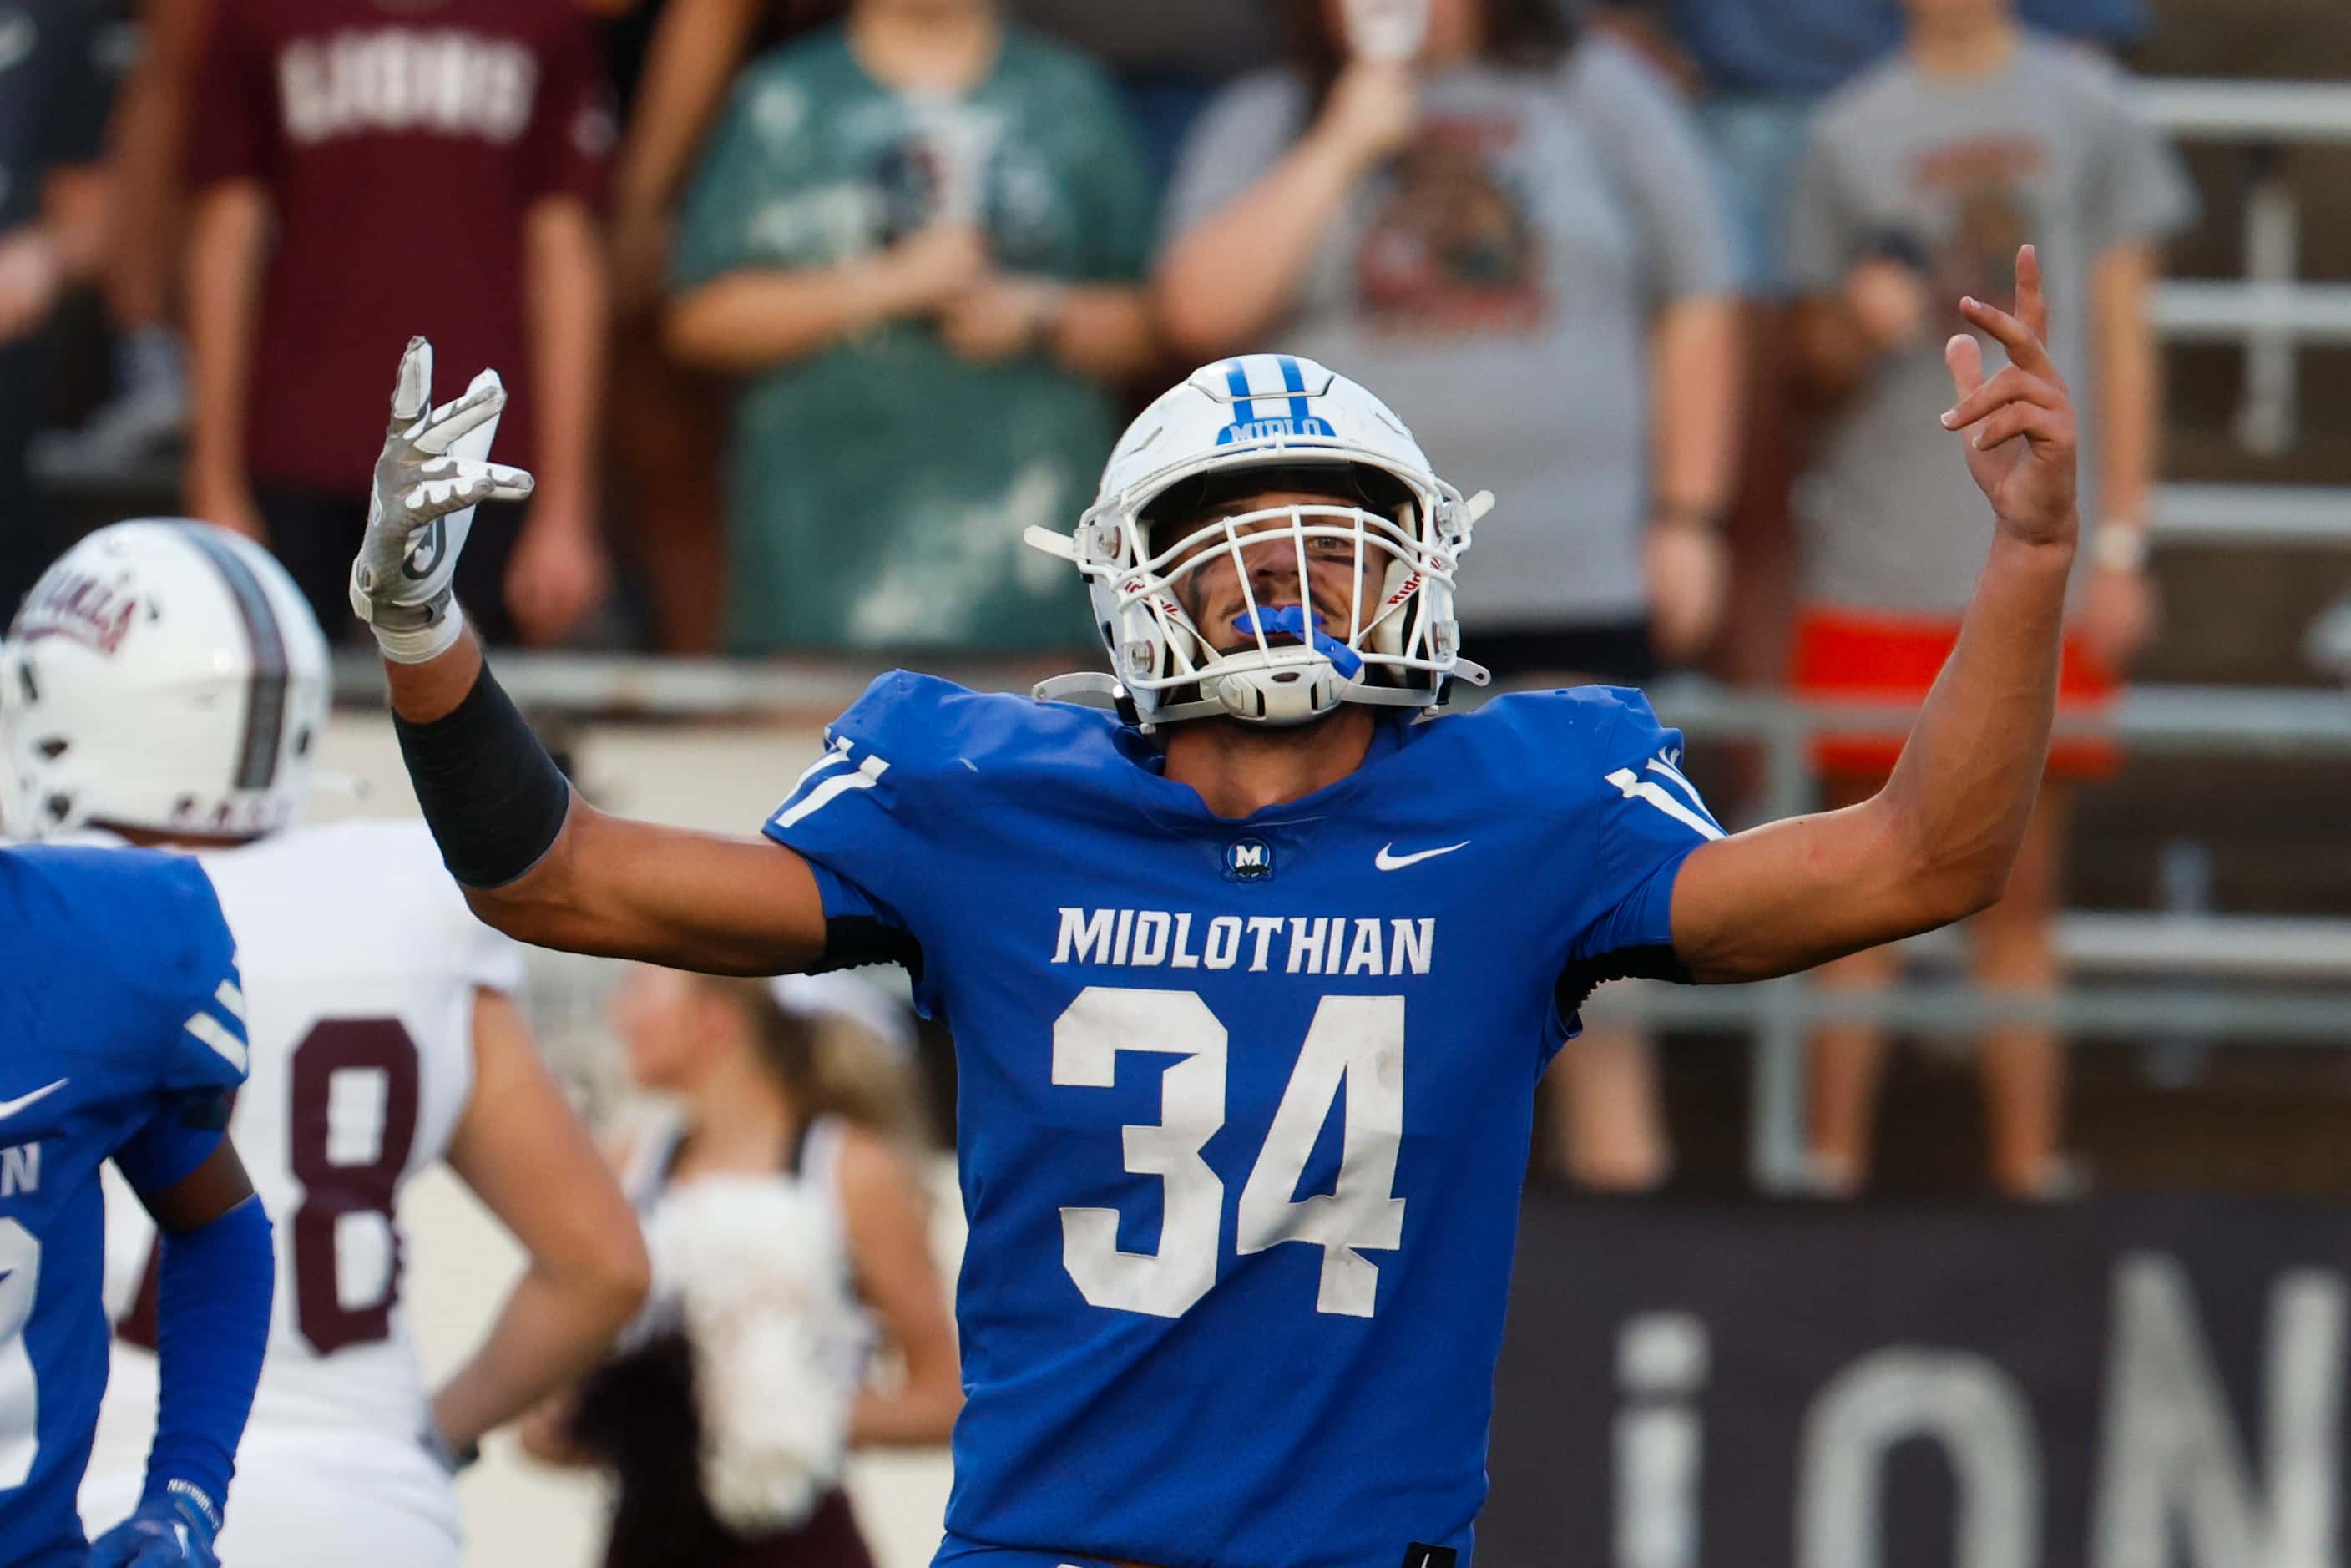 Midlothian high’s Jack Ashley (34) cheers after an intercept during the first half of a...